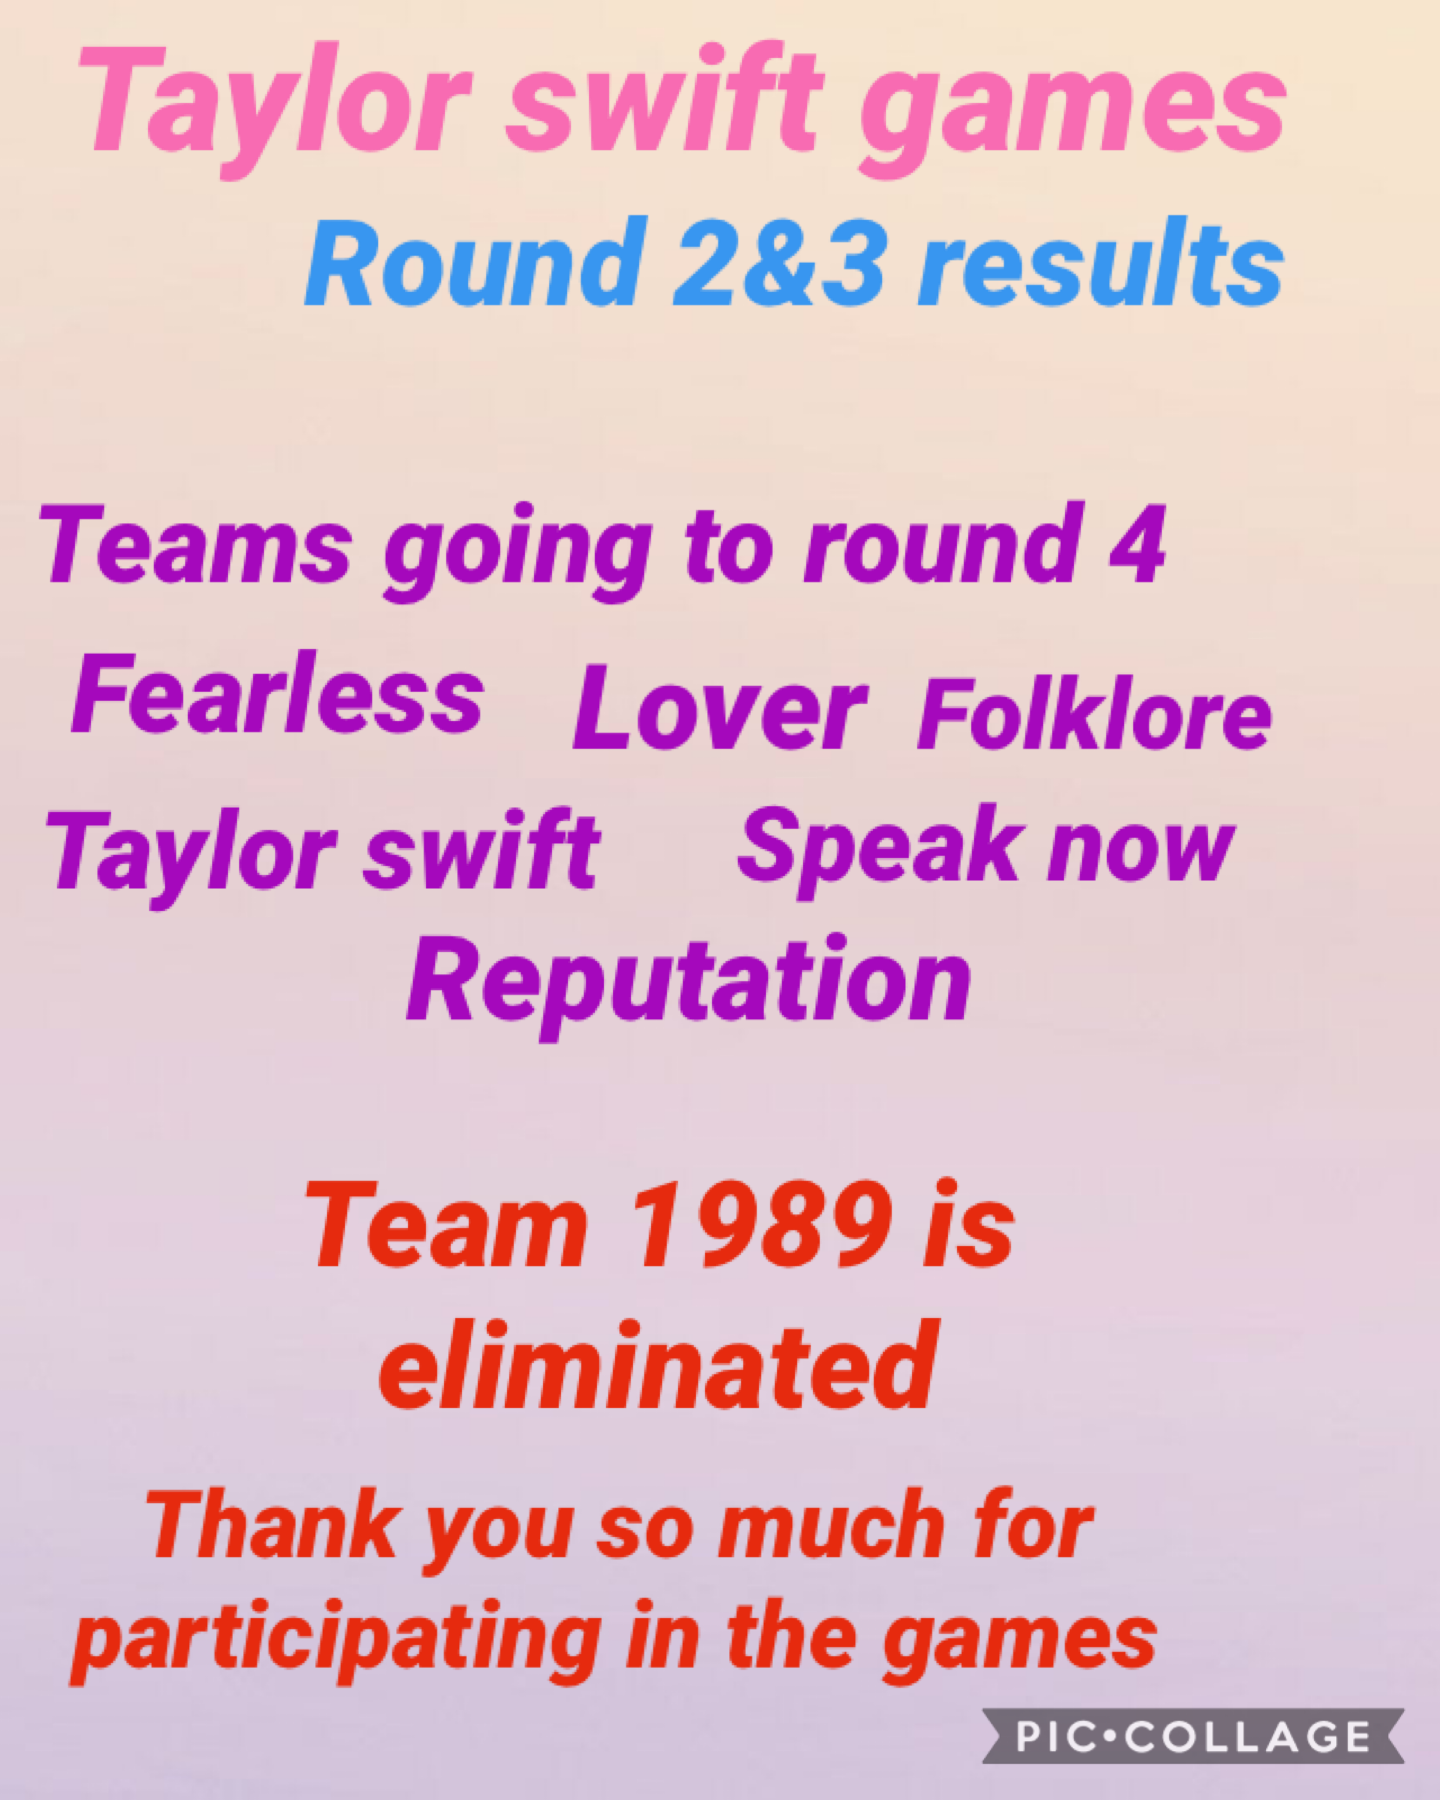 Taylor Swift games round 2&3 results 